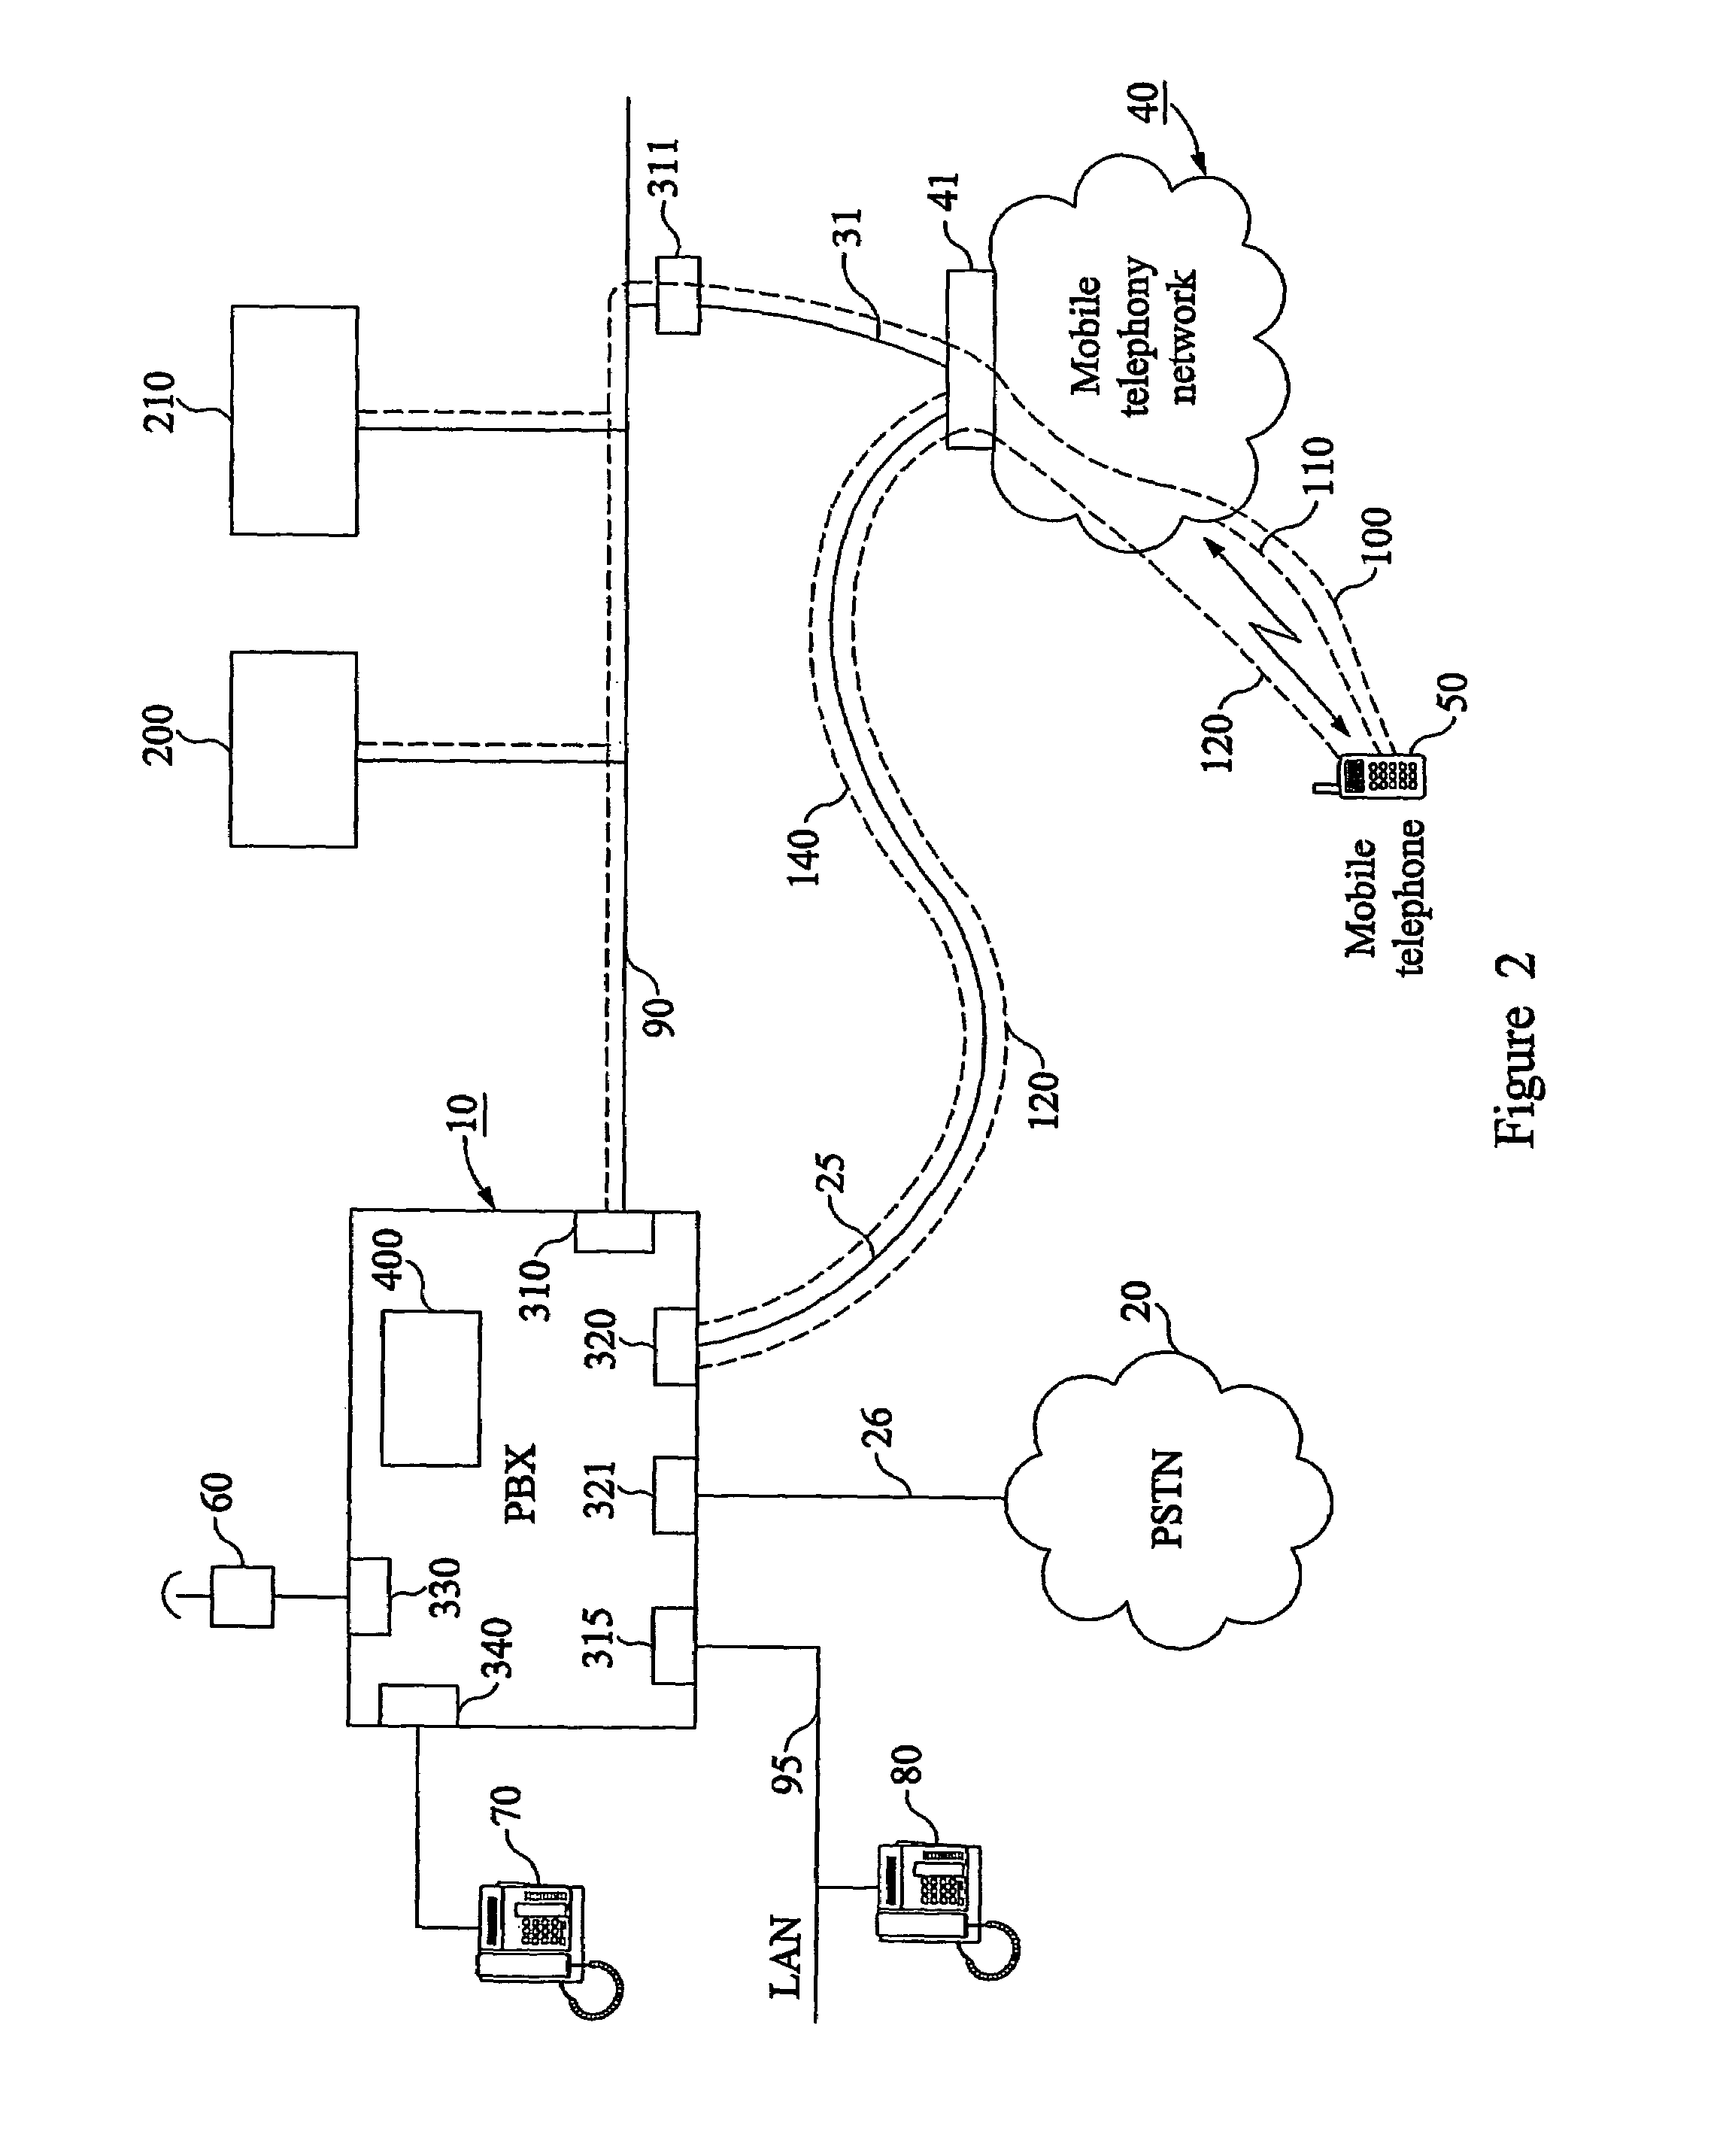 Method, apparatus and arrangement in a telecommunications network for providing control over and enabling advanced services and user interfaces in a mobile telephone